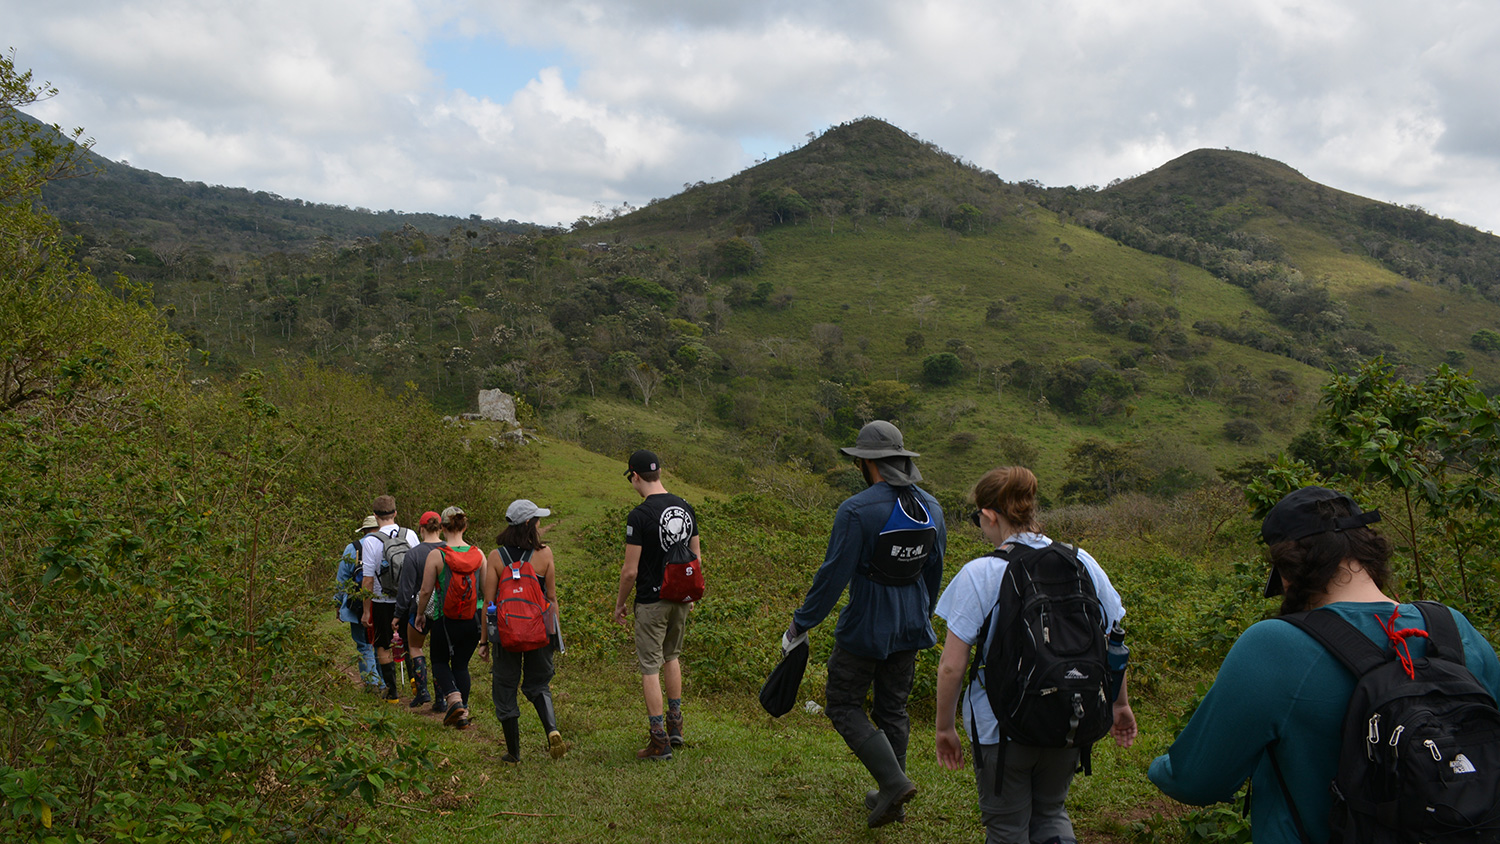 Students hike in a mountainous area of Nicaragua